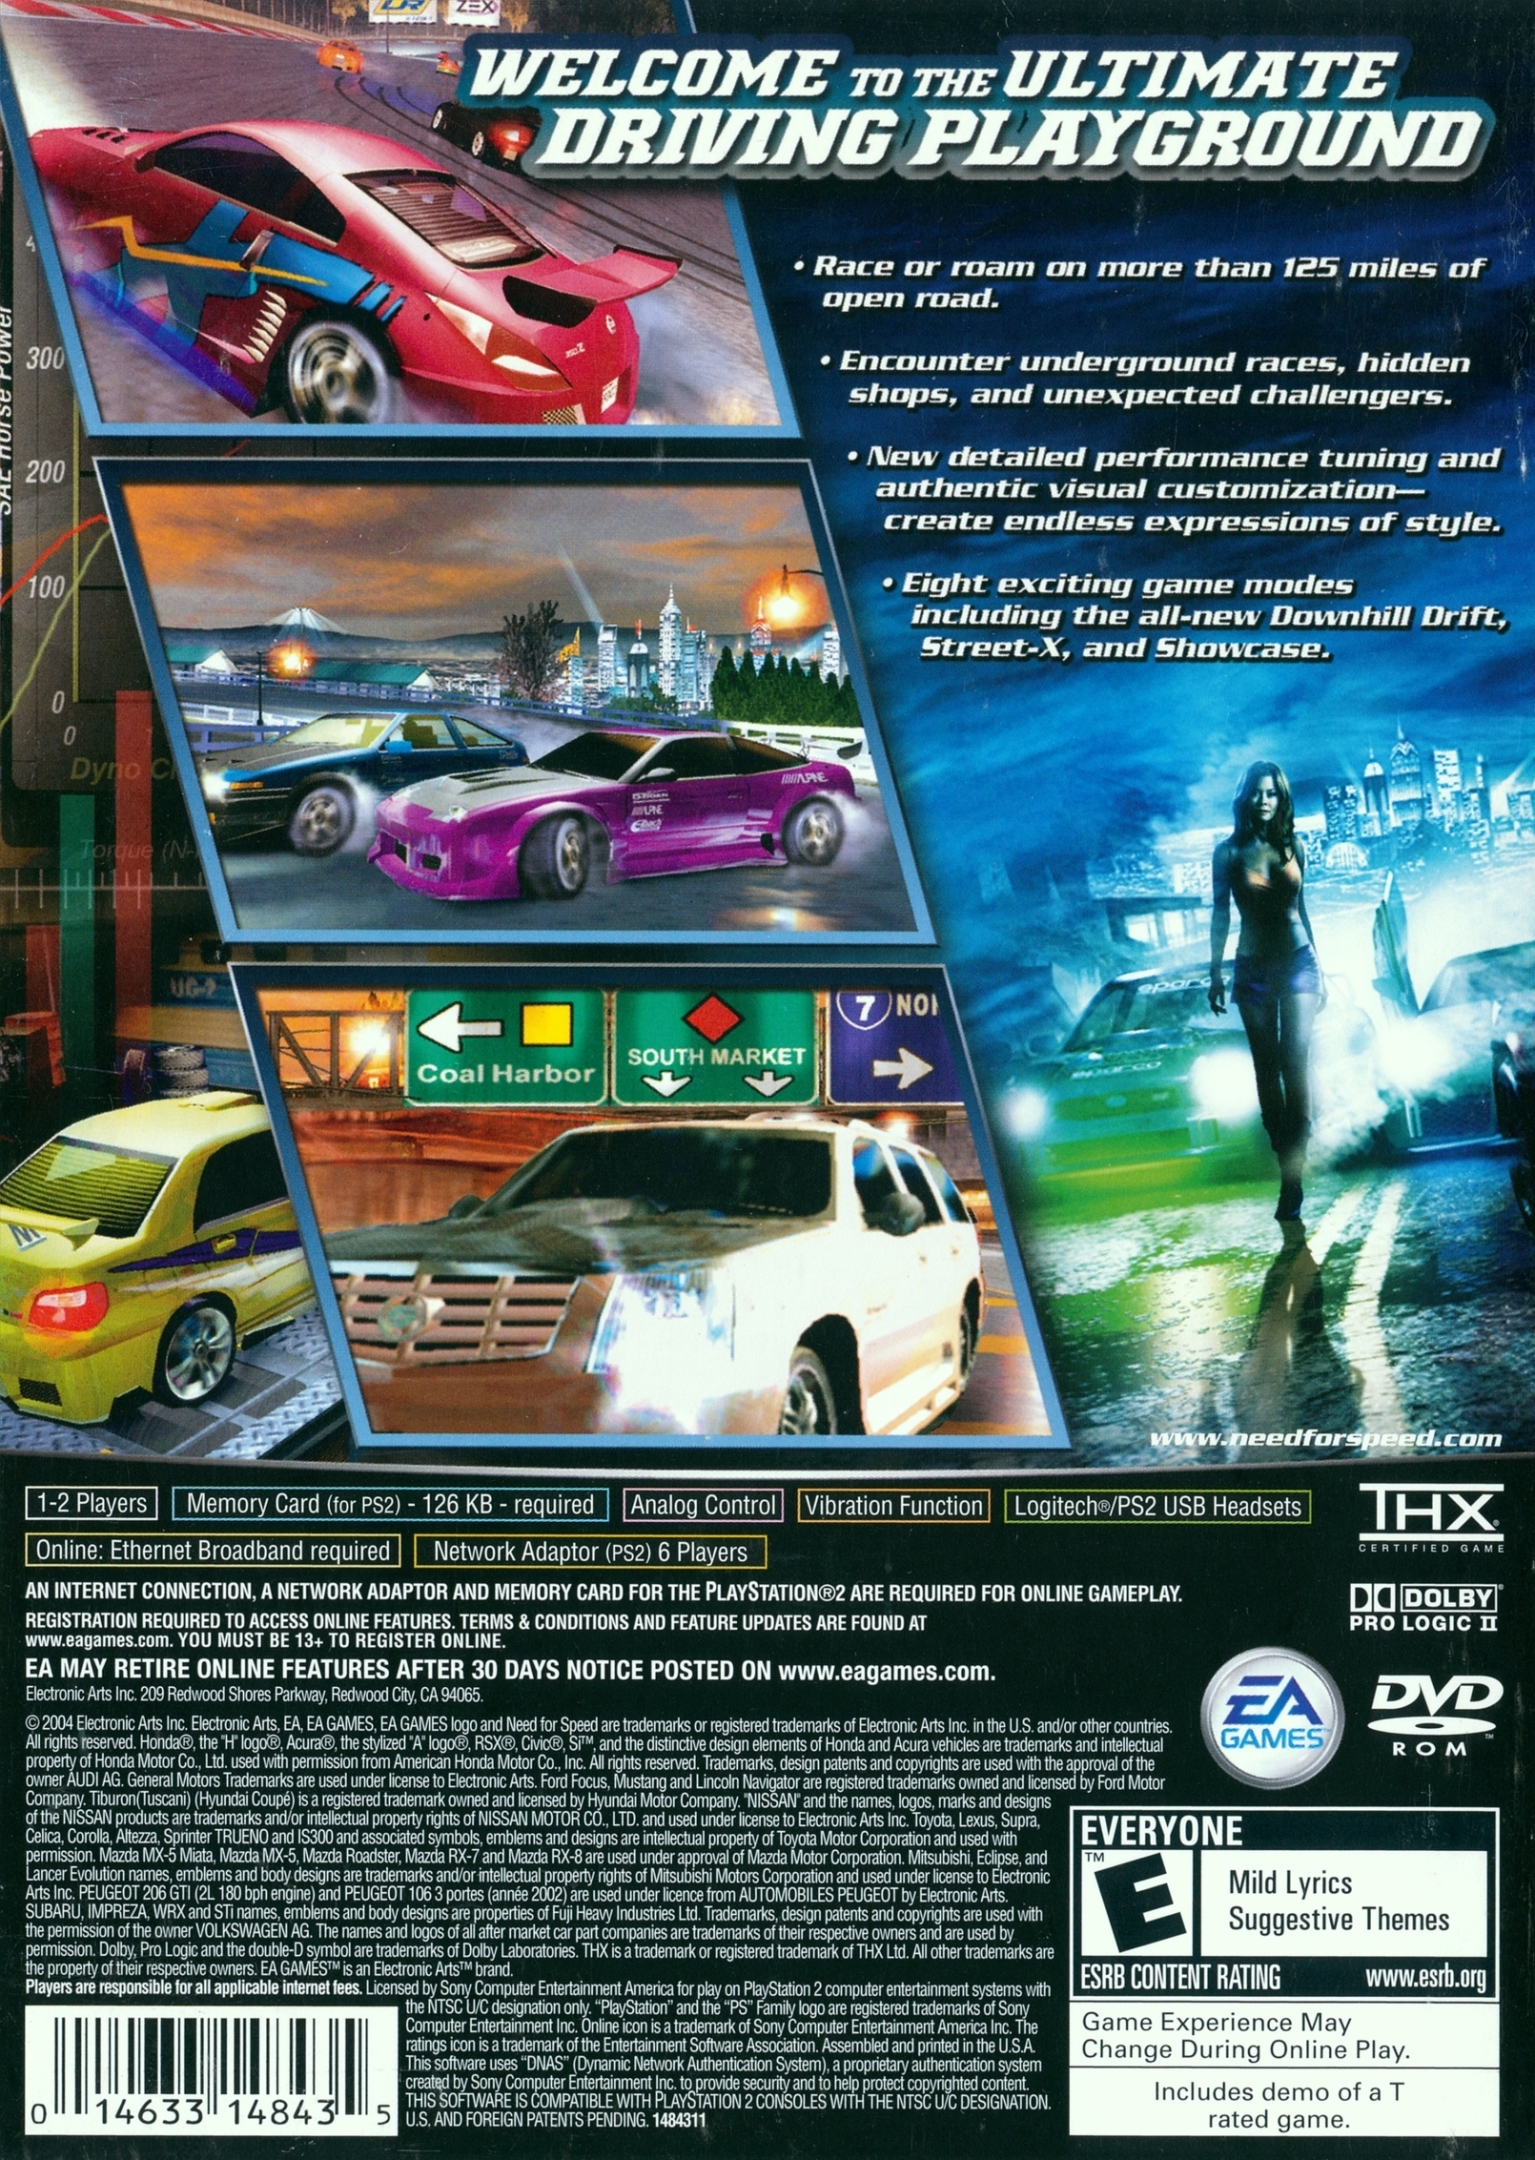 Learner amplification hundred Need for Speed Underground 2 Box Shot for PlayStation 2 - GameFAQs